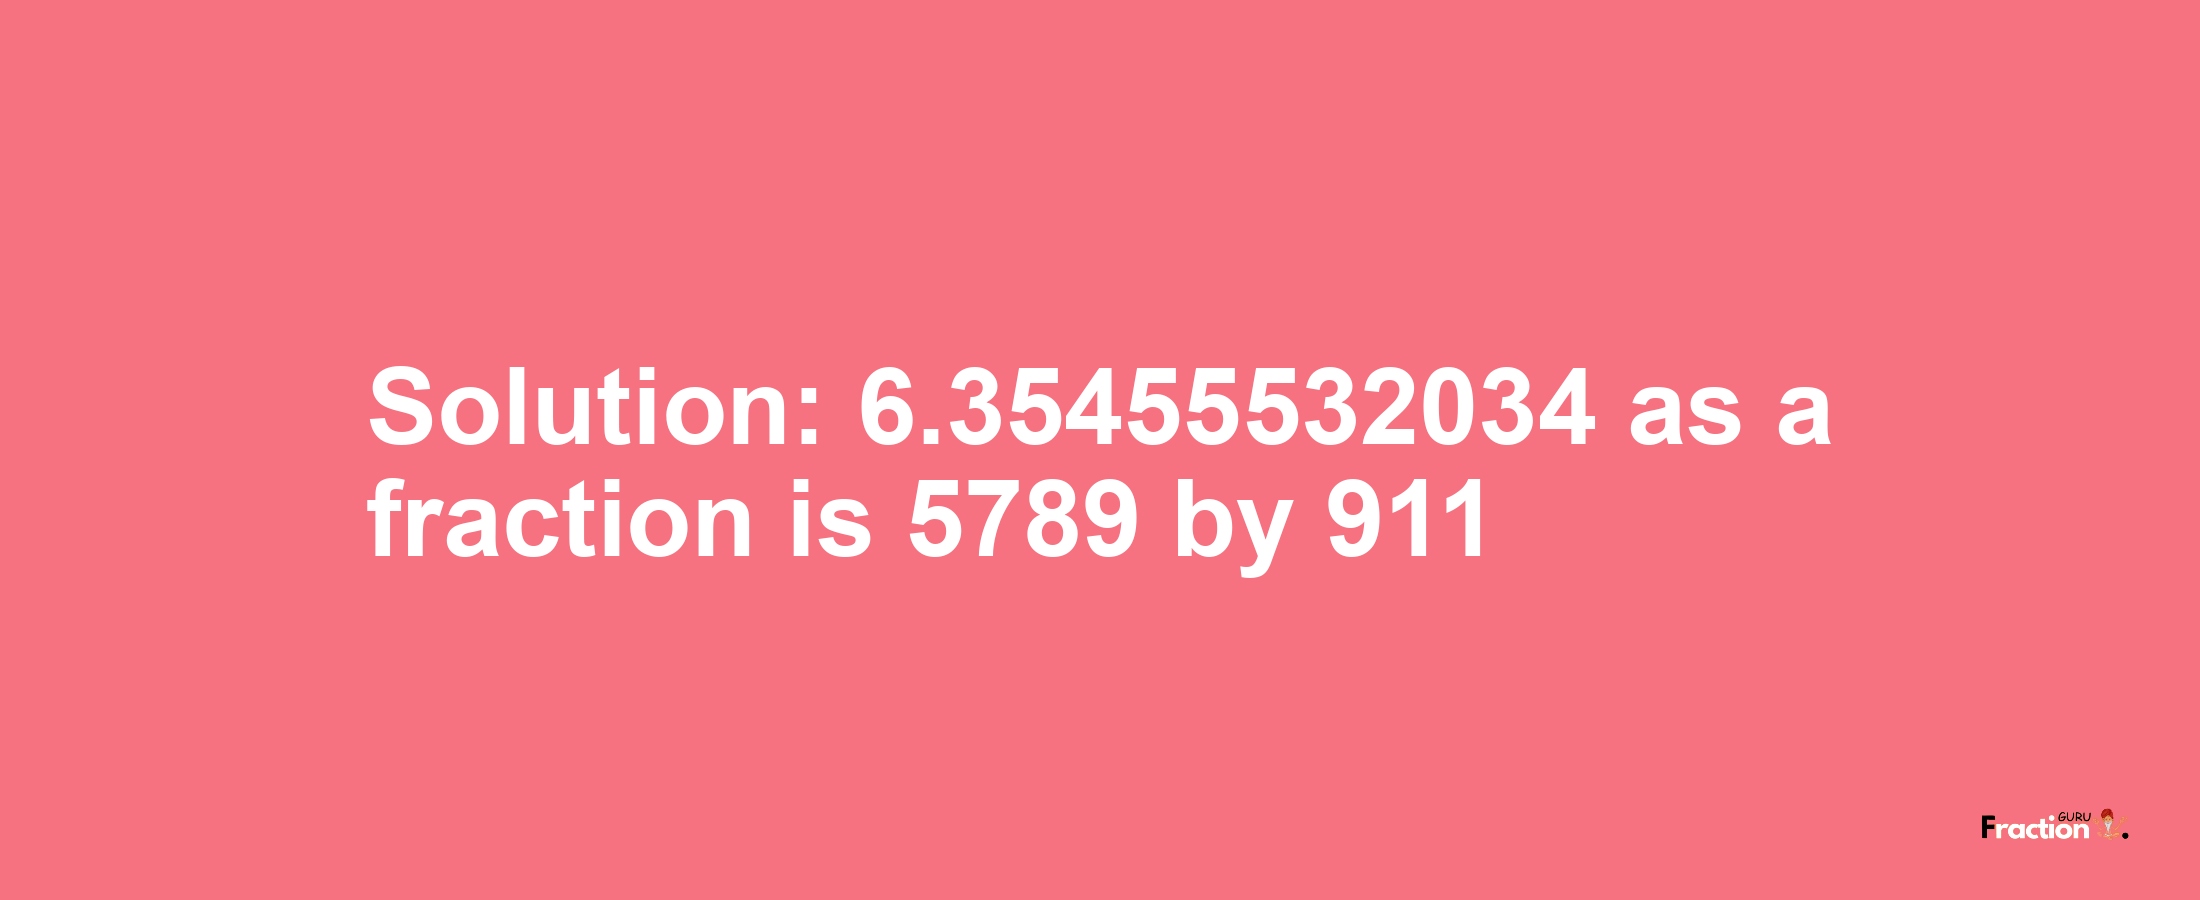 Solution:6.35455532034 as a fraction is 5789/911